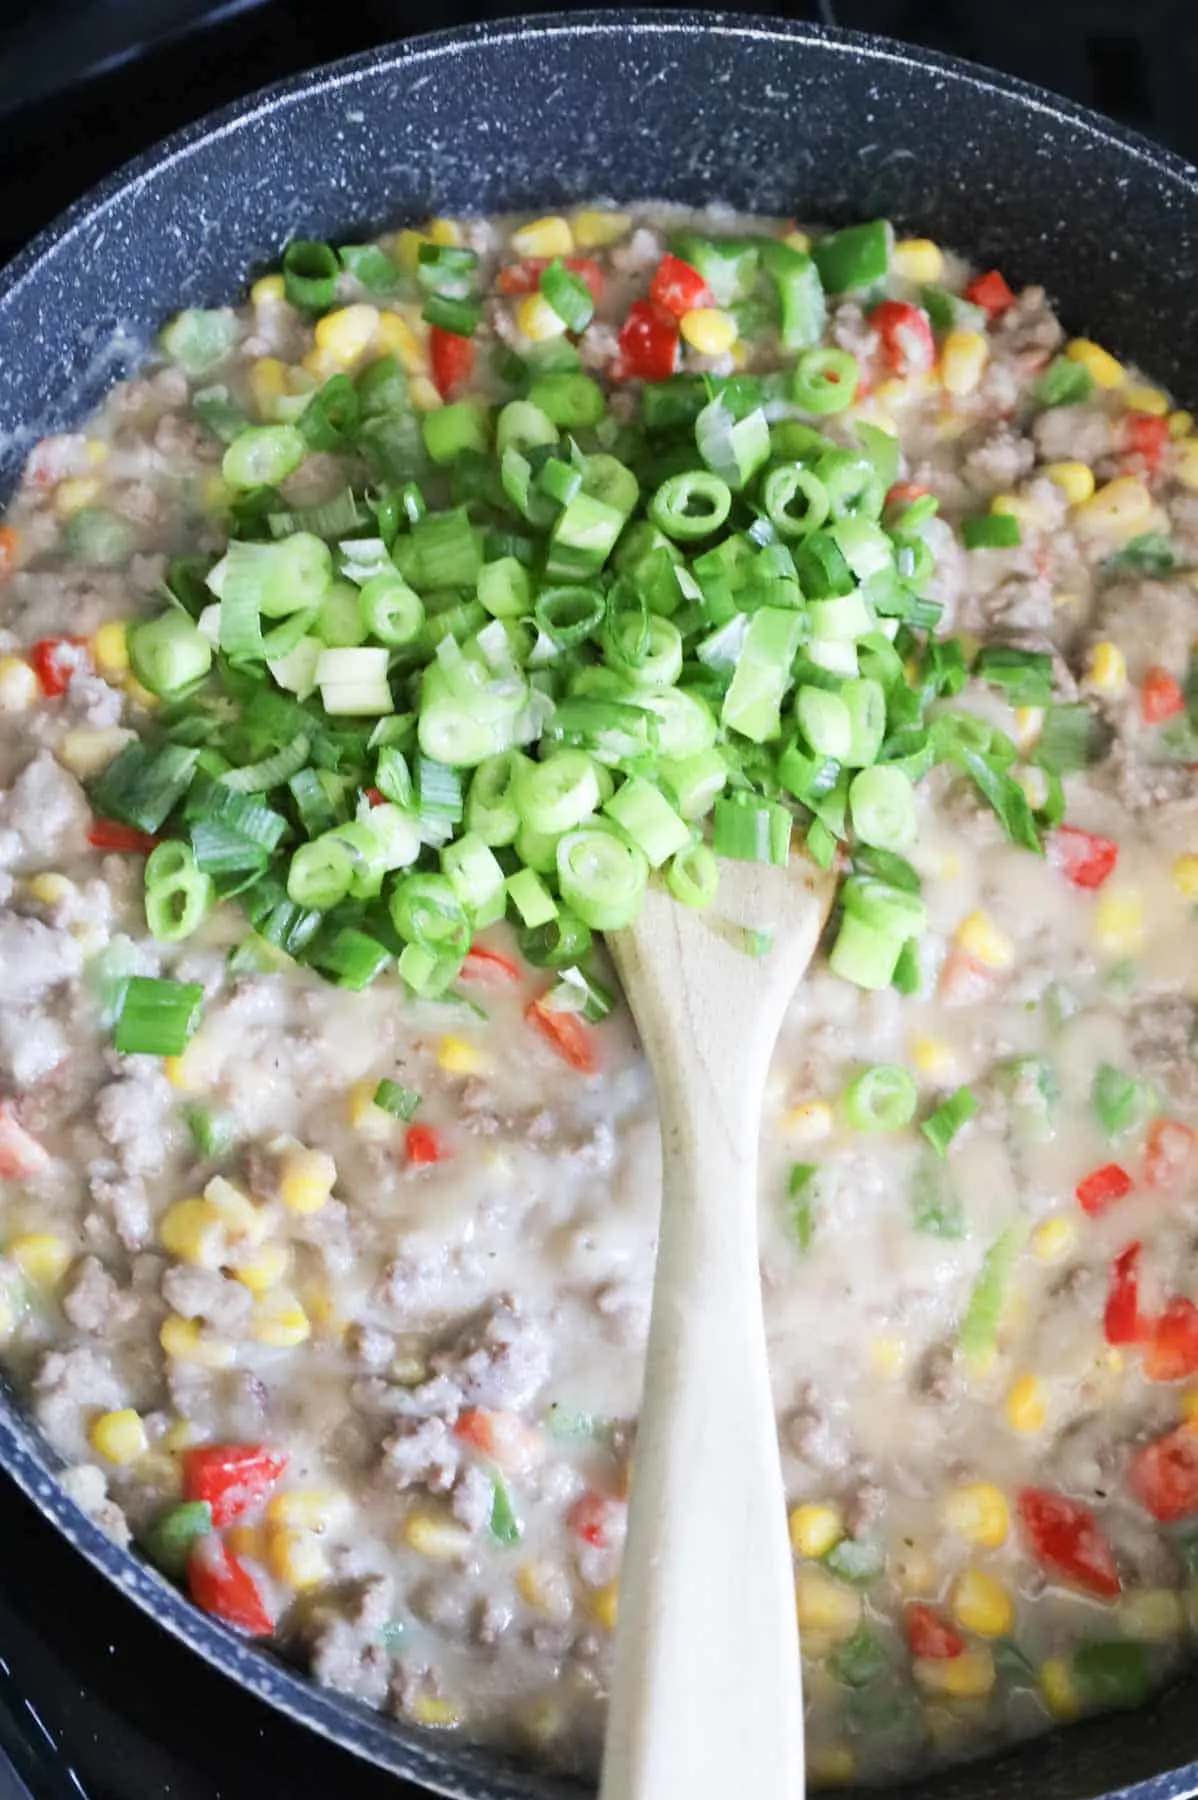 chopped green onions on top of mashed potato, ground beef and veggie mixture in a skillet